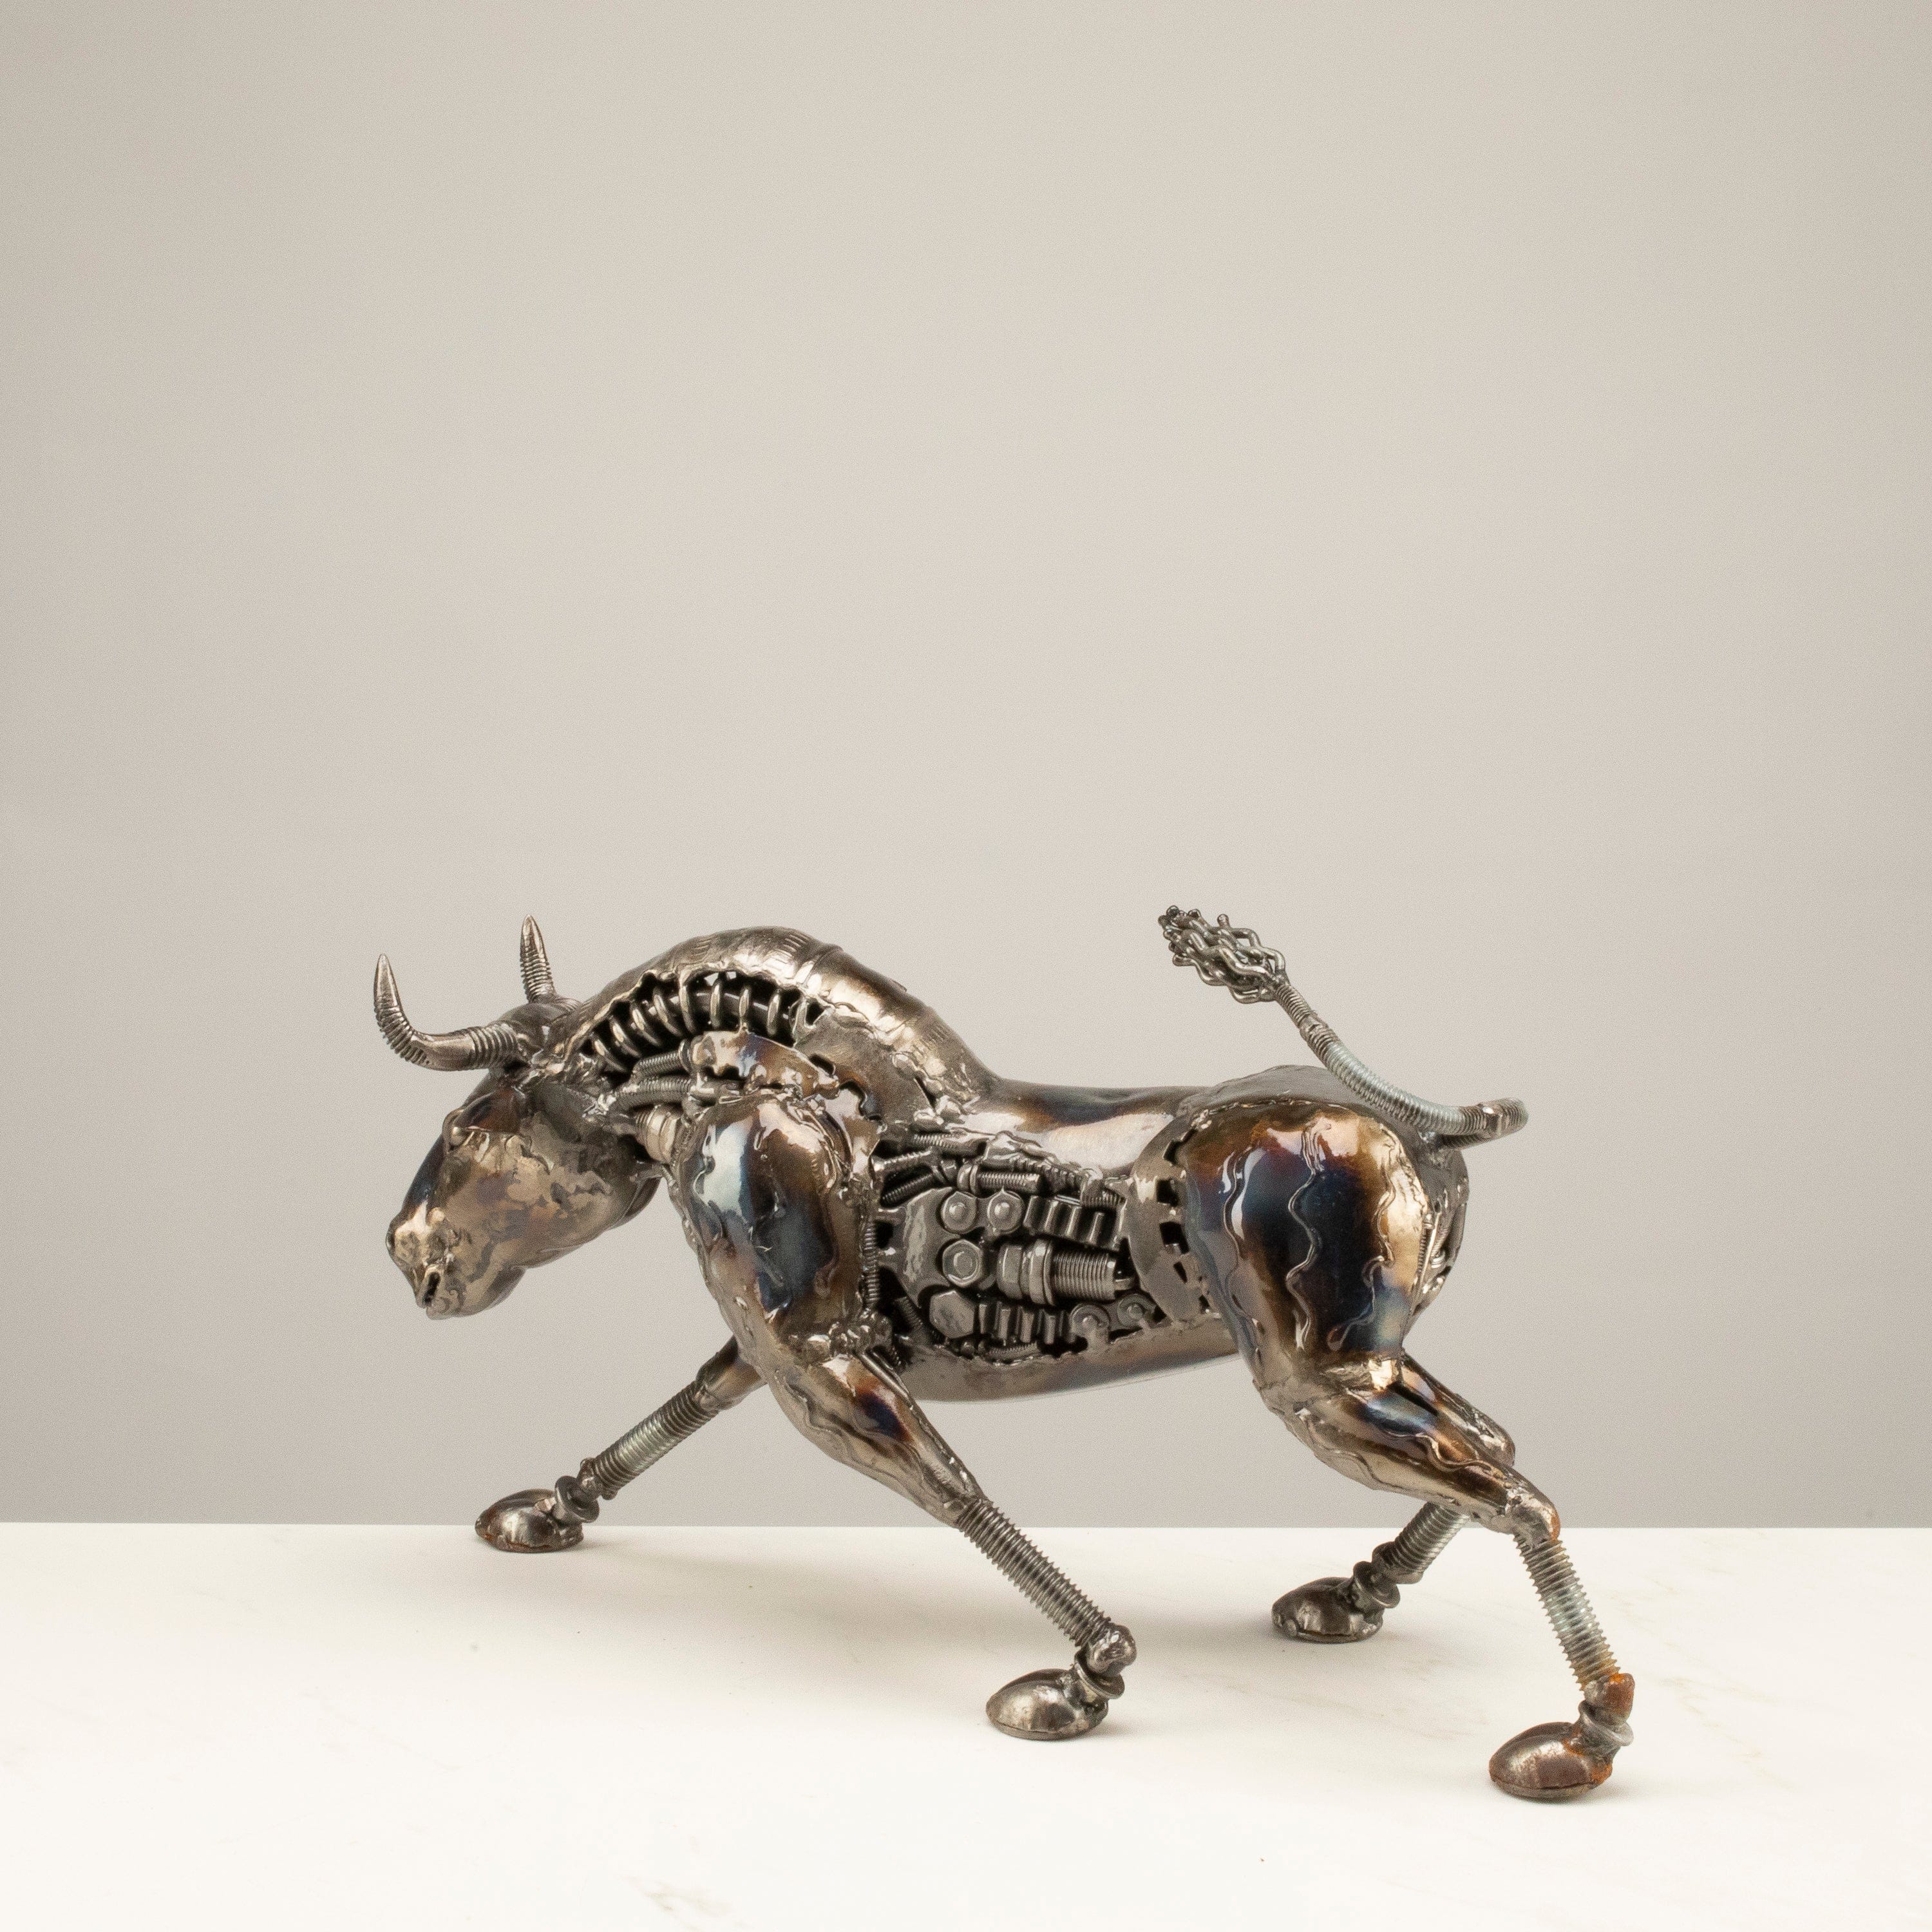 KALIFANO Recycled Metal Art Charging Bull Inspired Recycled Metal Art Sculpture RMS-2500BL-PK